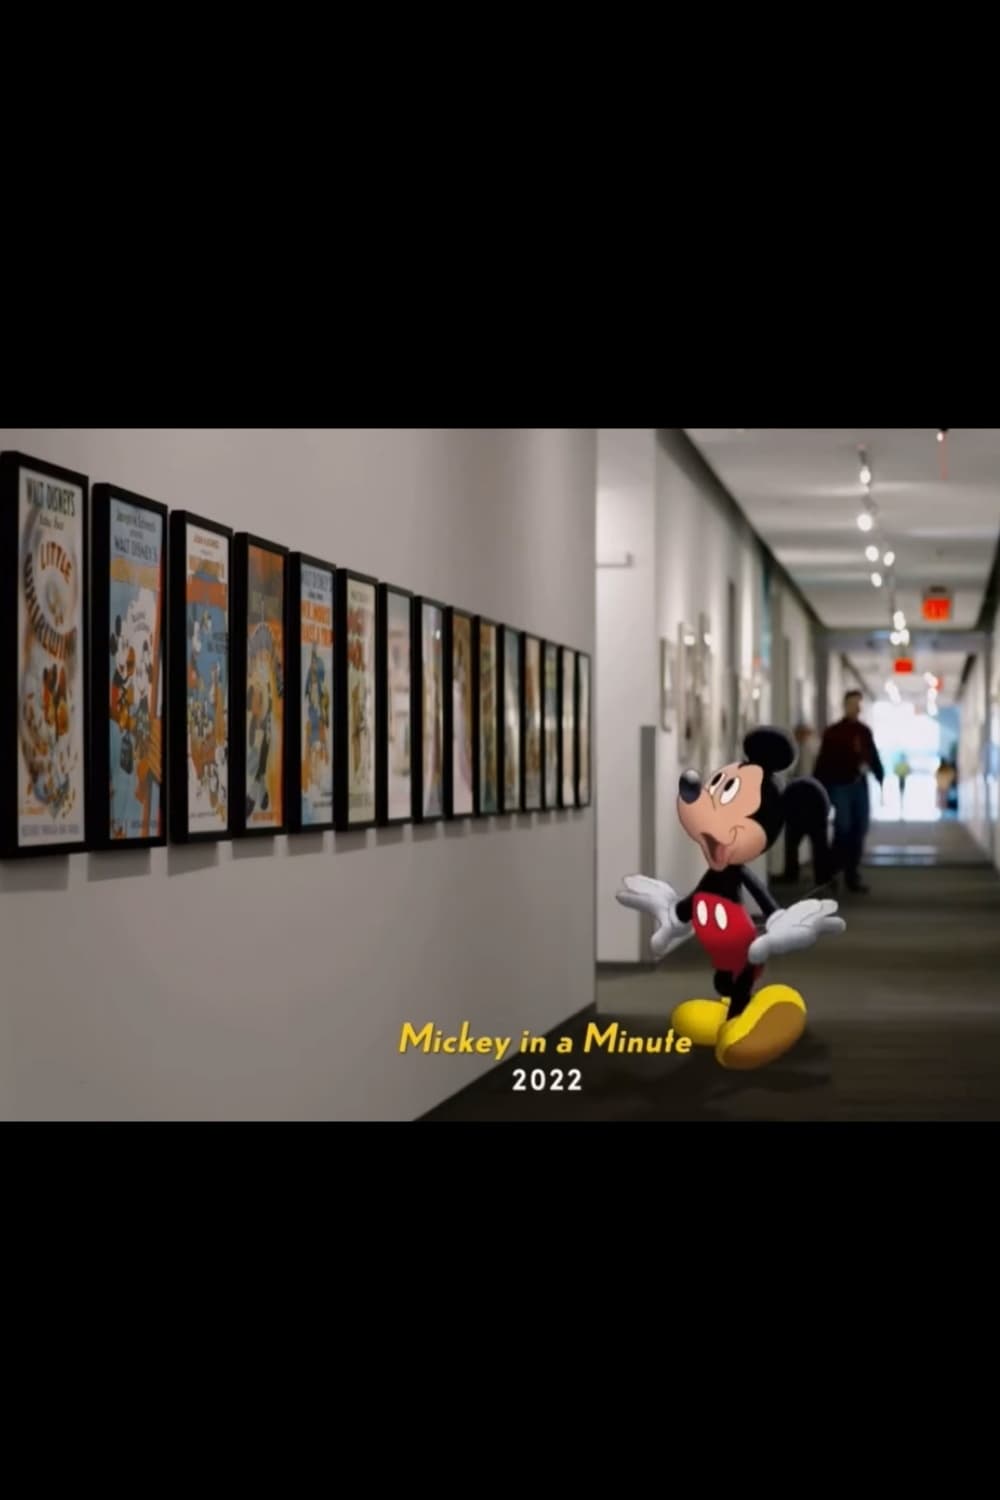 Mickey in a Minute